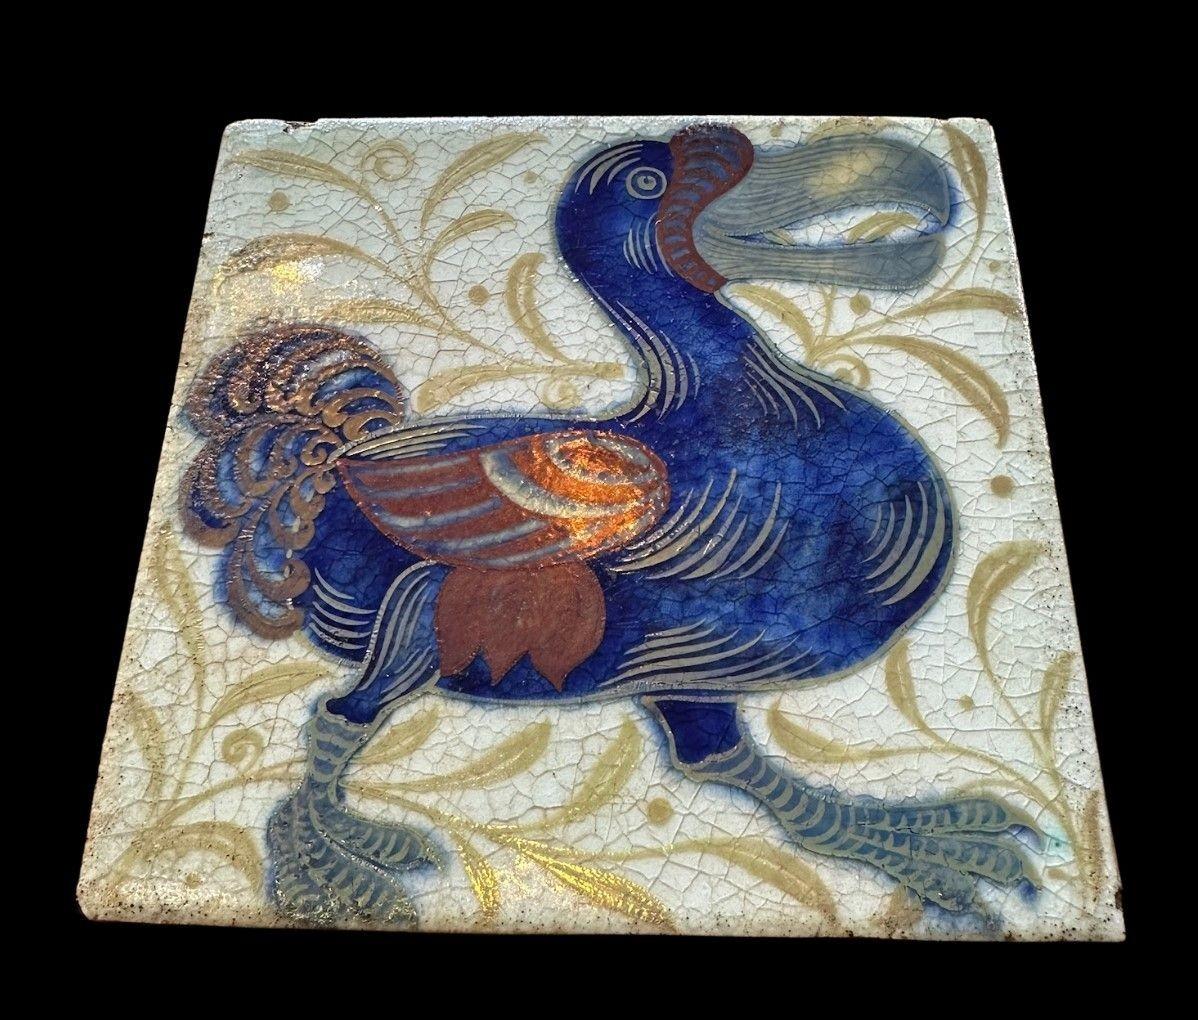 5515
William De Morgan Triple Lustre Tile decorated in the “Dodo” design
15.3cm x 15.3cm
1898
Provenance:
Purchased by the Earl of Balfor (UK Prime Minister 1902 - 1905) directly from William De Morgan, thence by descent
Small chip to top edge and